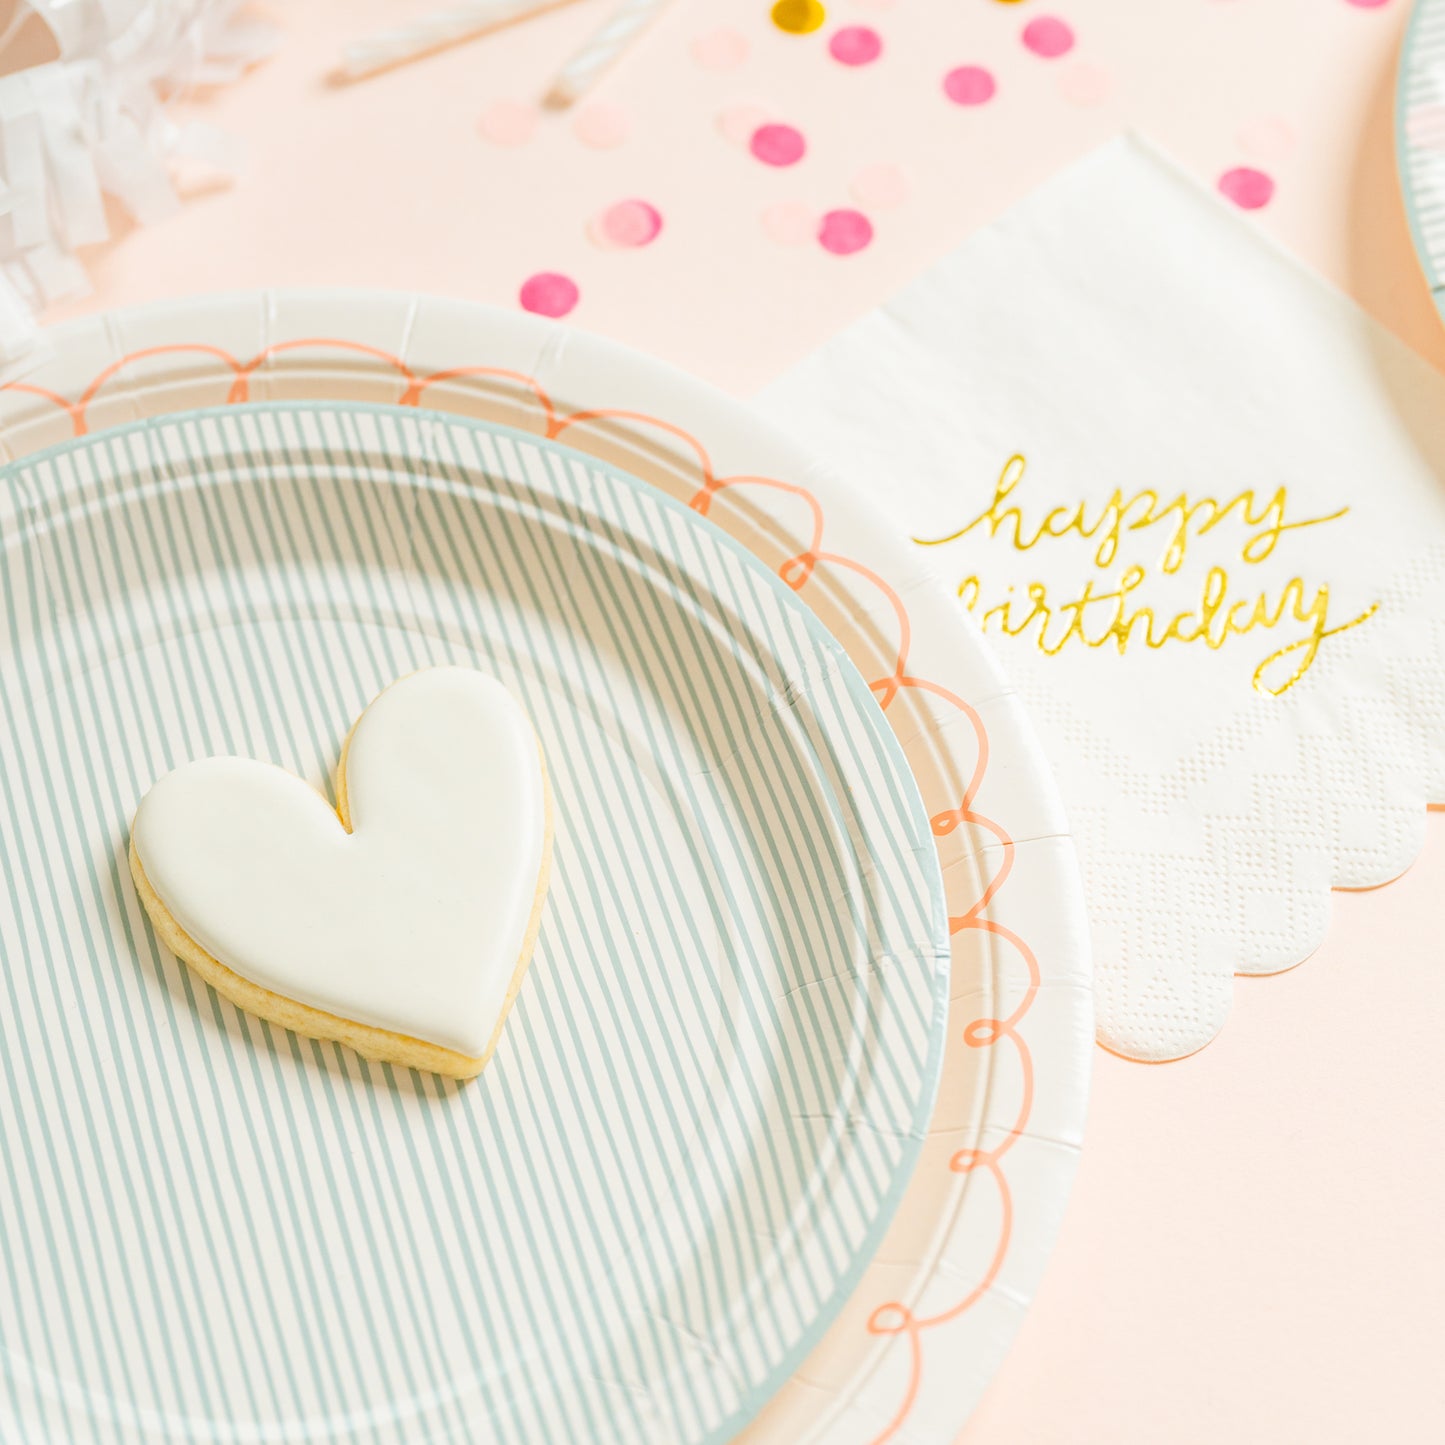 gold foil happy birthday napkin with party decoration and a heart cookie